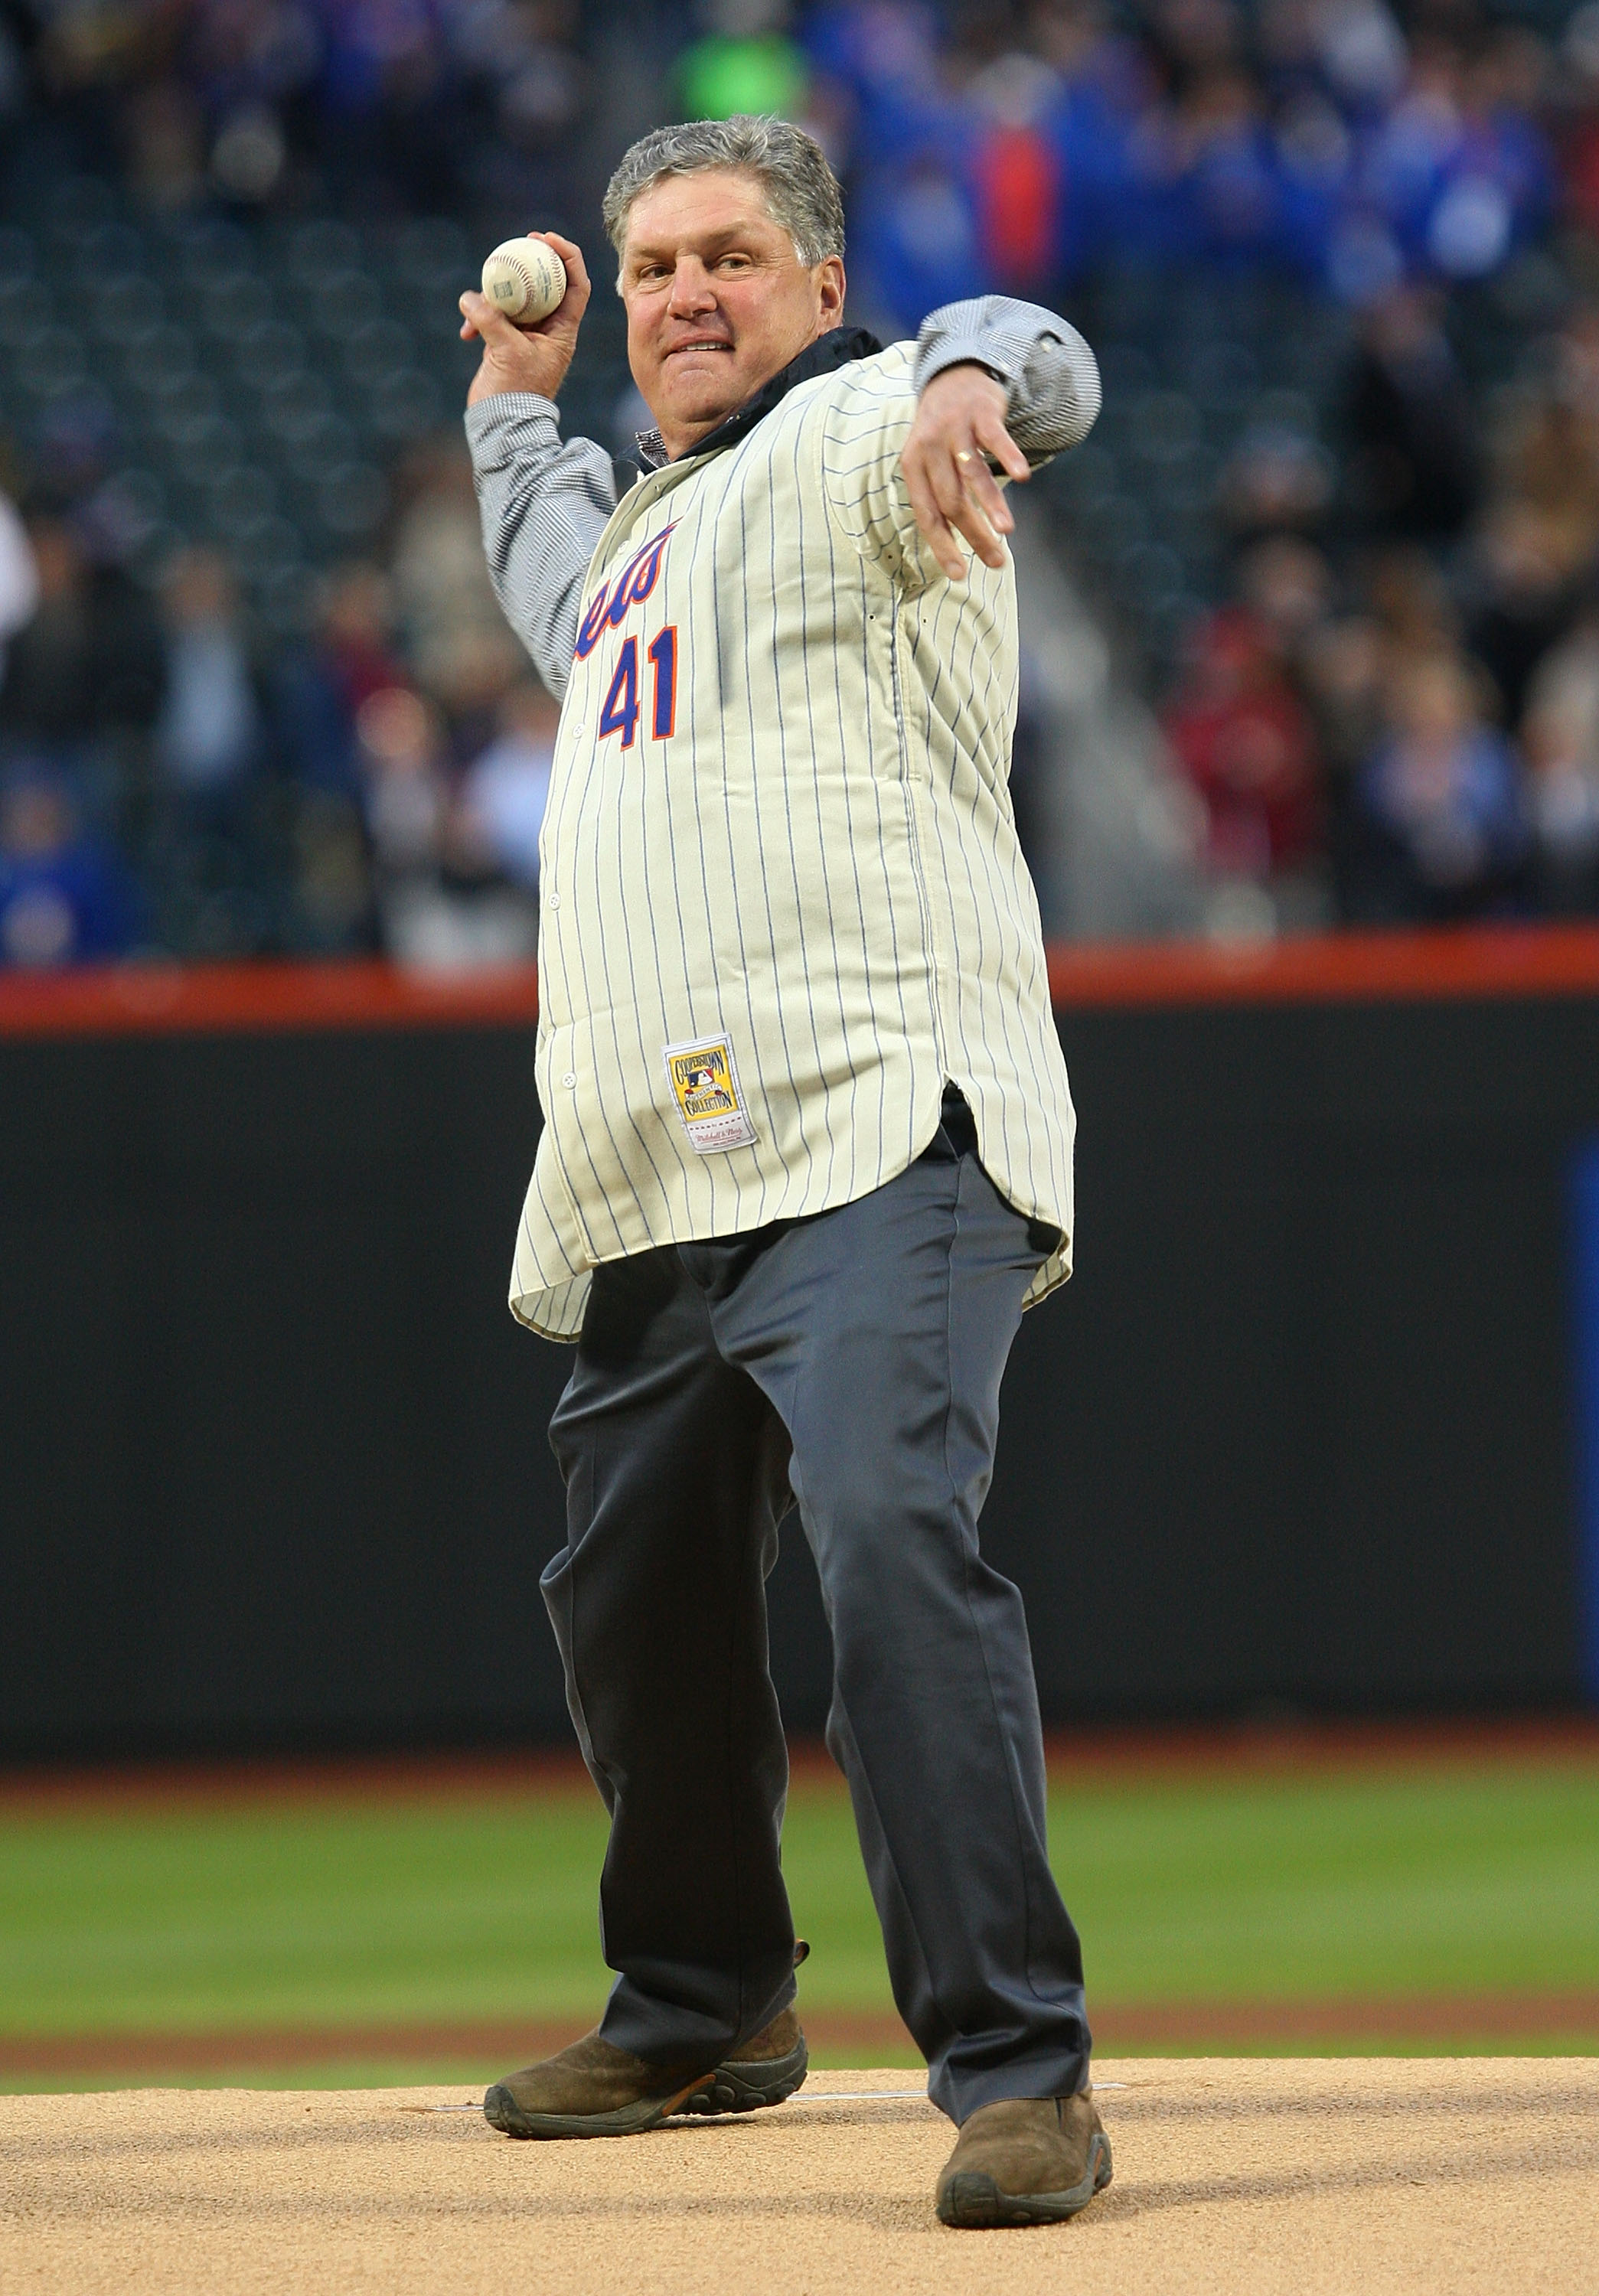 NEW YORK - APRIL 13:  Former Mets pitcher Tom Seaver throws out the ceremonial first pitch before the San Diego Padres against the New York Mets during opening day at Citi Field on April 13, 2009 in the Flushing neighborhood of the Queens borough of New Y